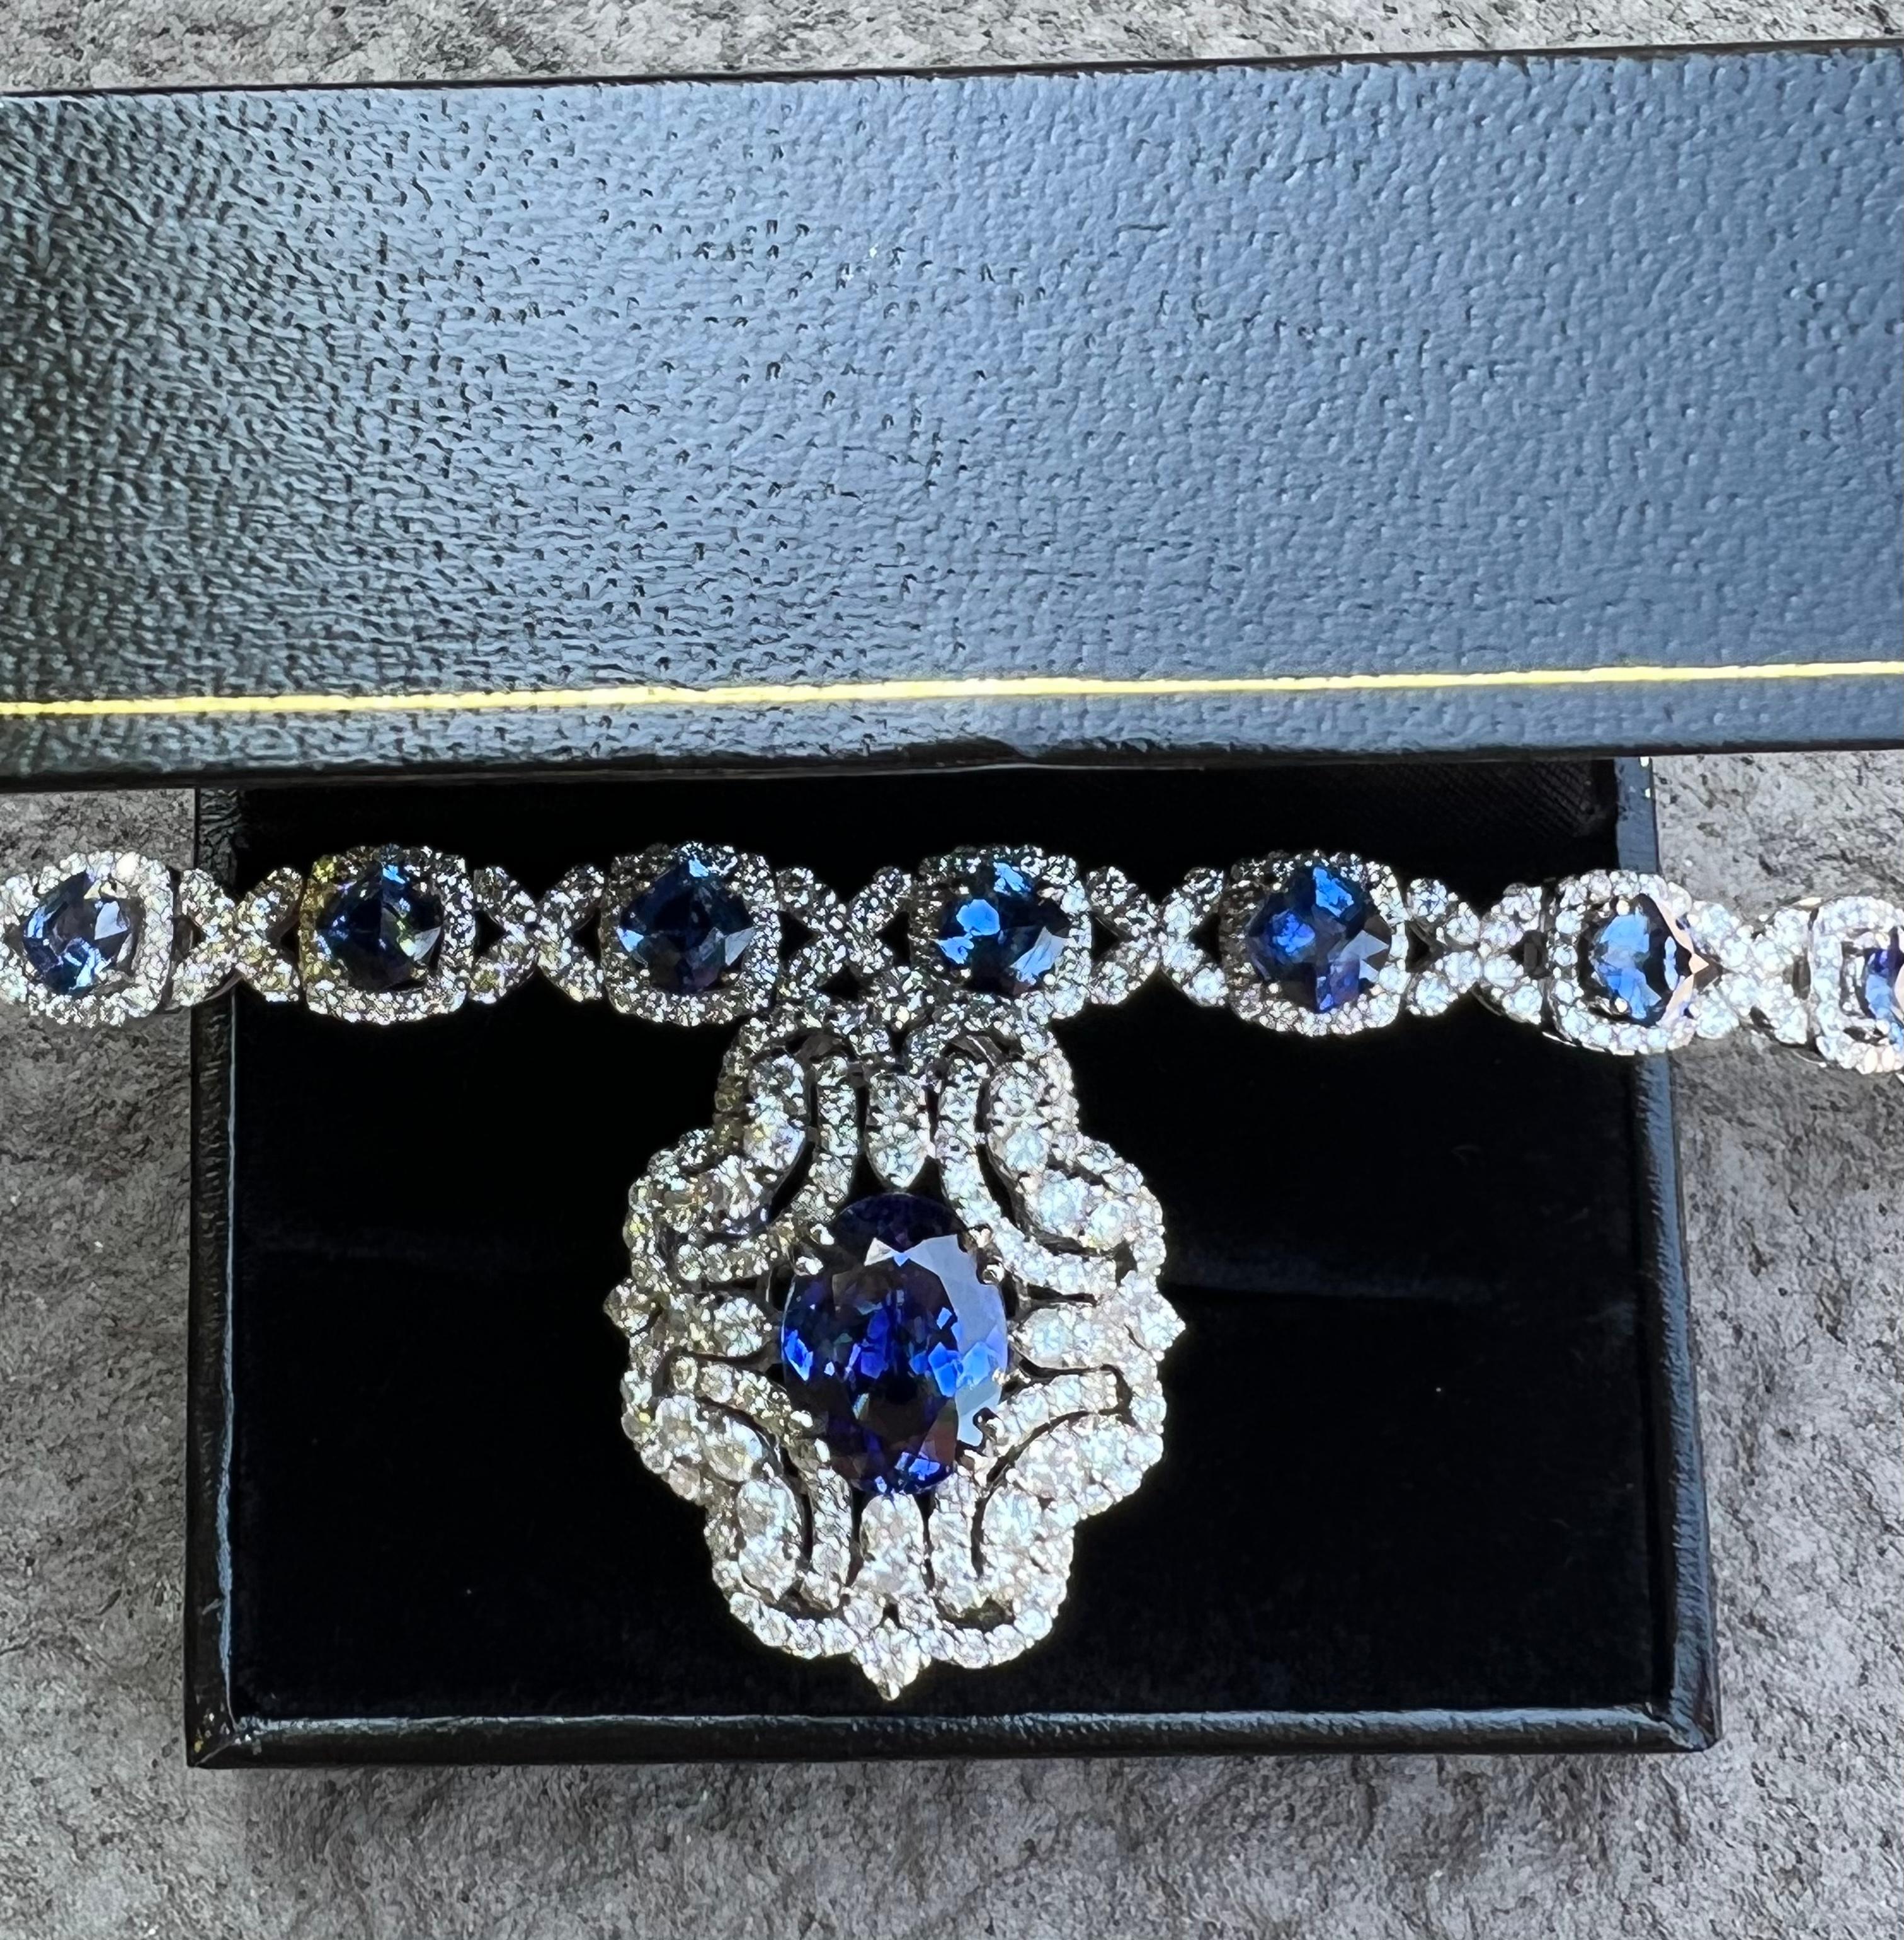 Very exquisite, estate 15.83 carat Ceylon sapphire and diamond 18 karat white gold tennis or line bracelet features 12 beautifully matched, cushion cut Ceylon sapphires mounted in 4 prong stations, surrounded by a halo of the most sparkling round